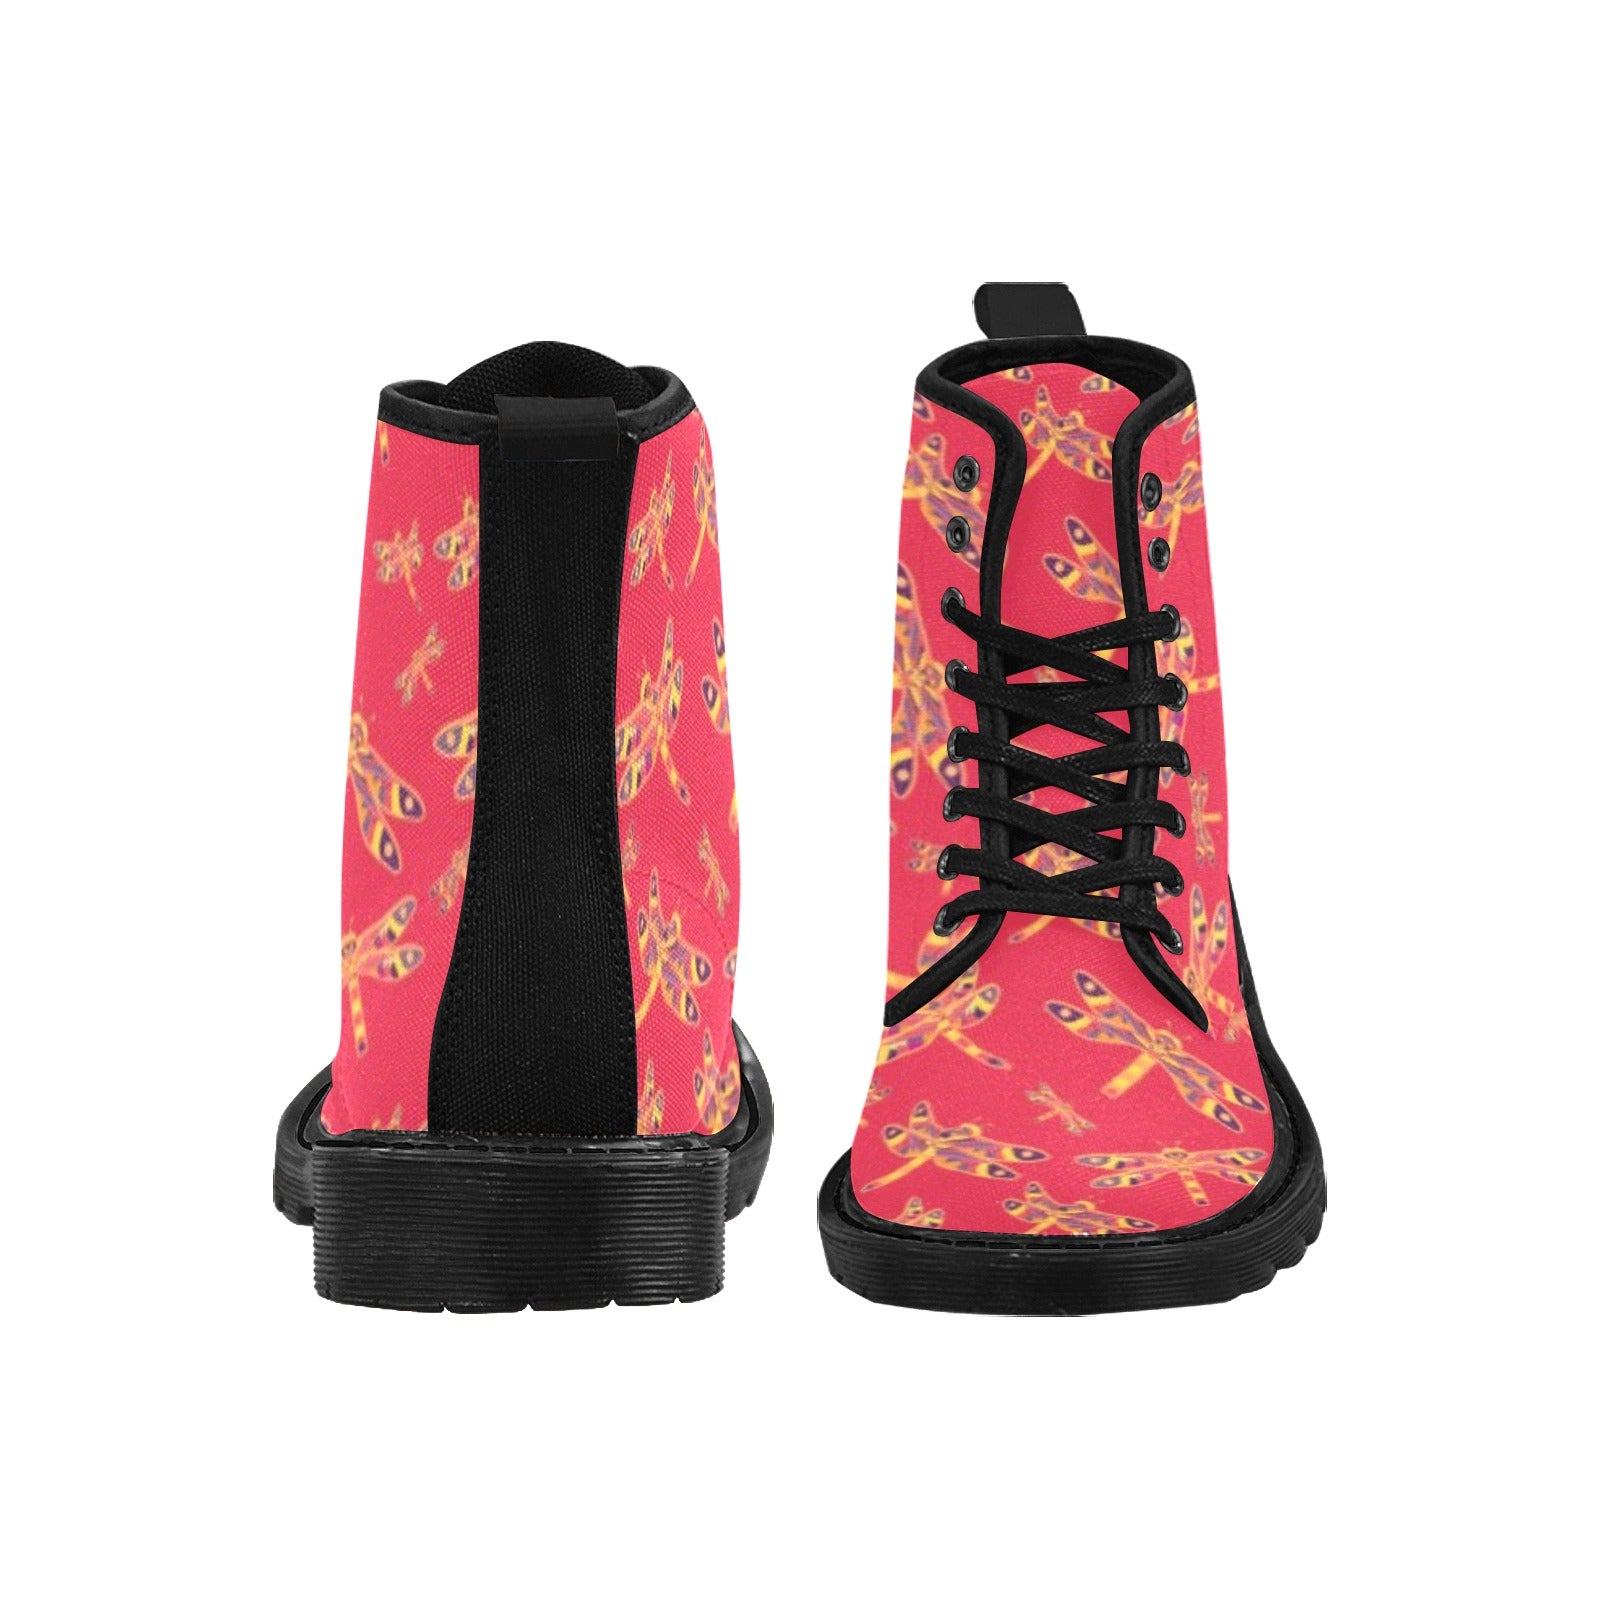 Gathering Rouge Boots for Women (Black)